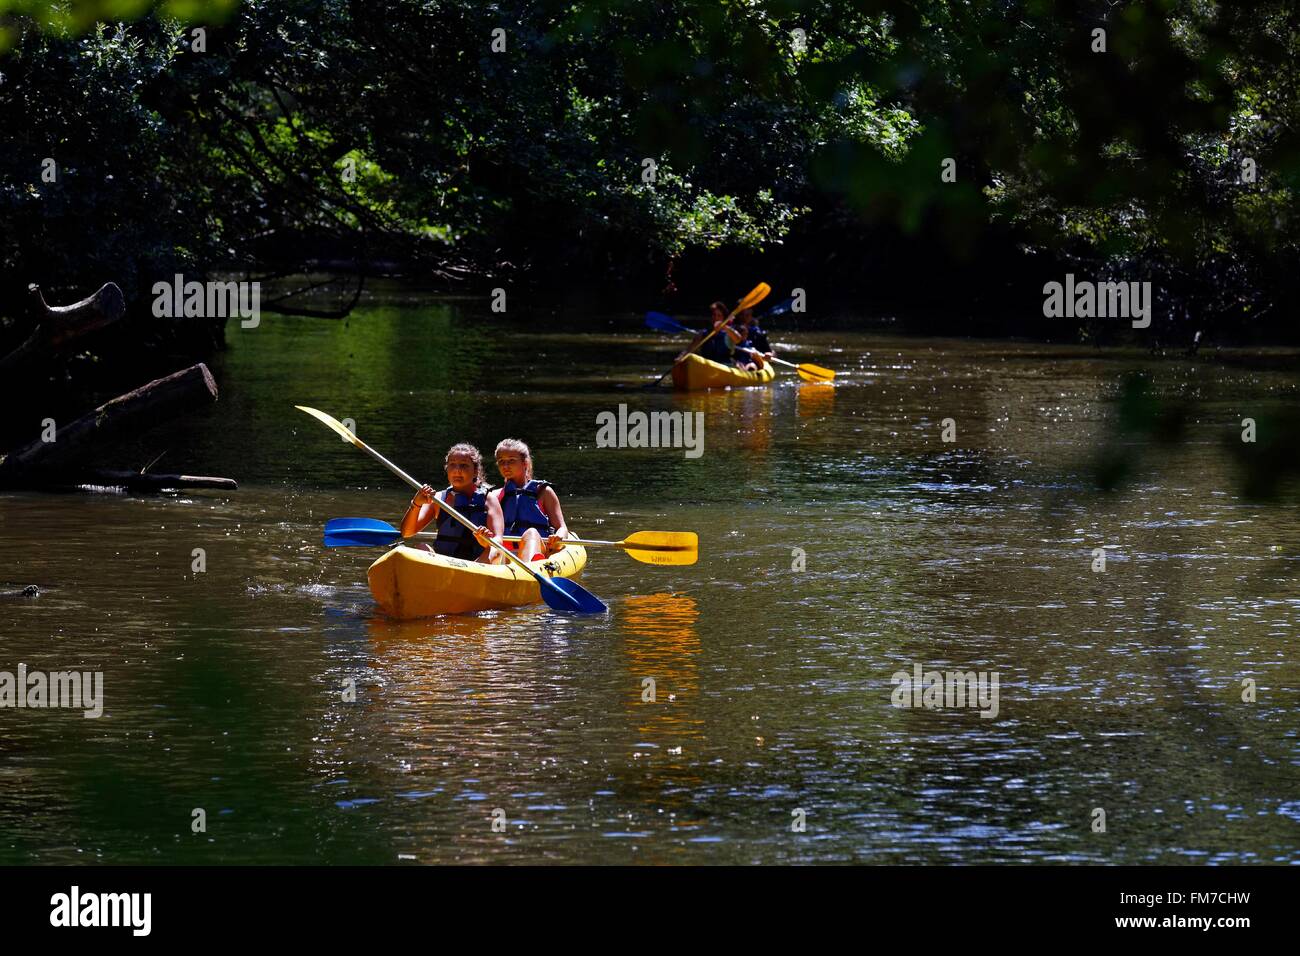 France, Gironde, Bassin d'Arcachon, Le Teich, kayaking on the Leyre river Stock Photo